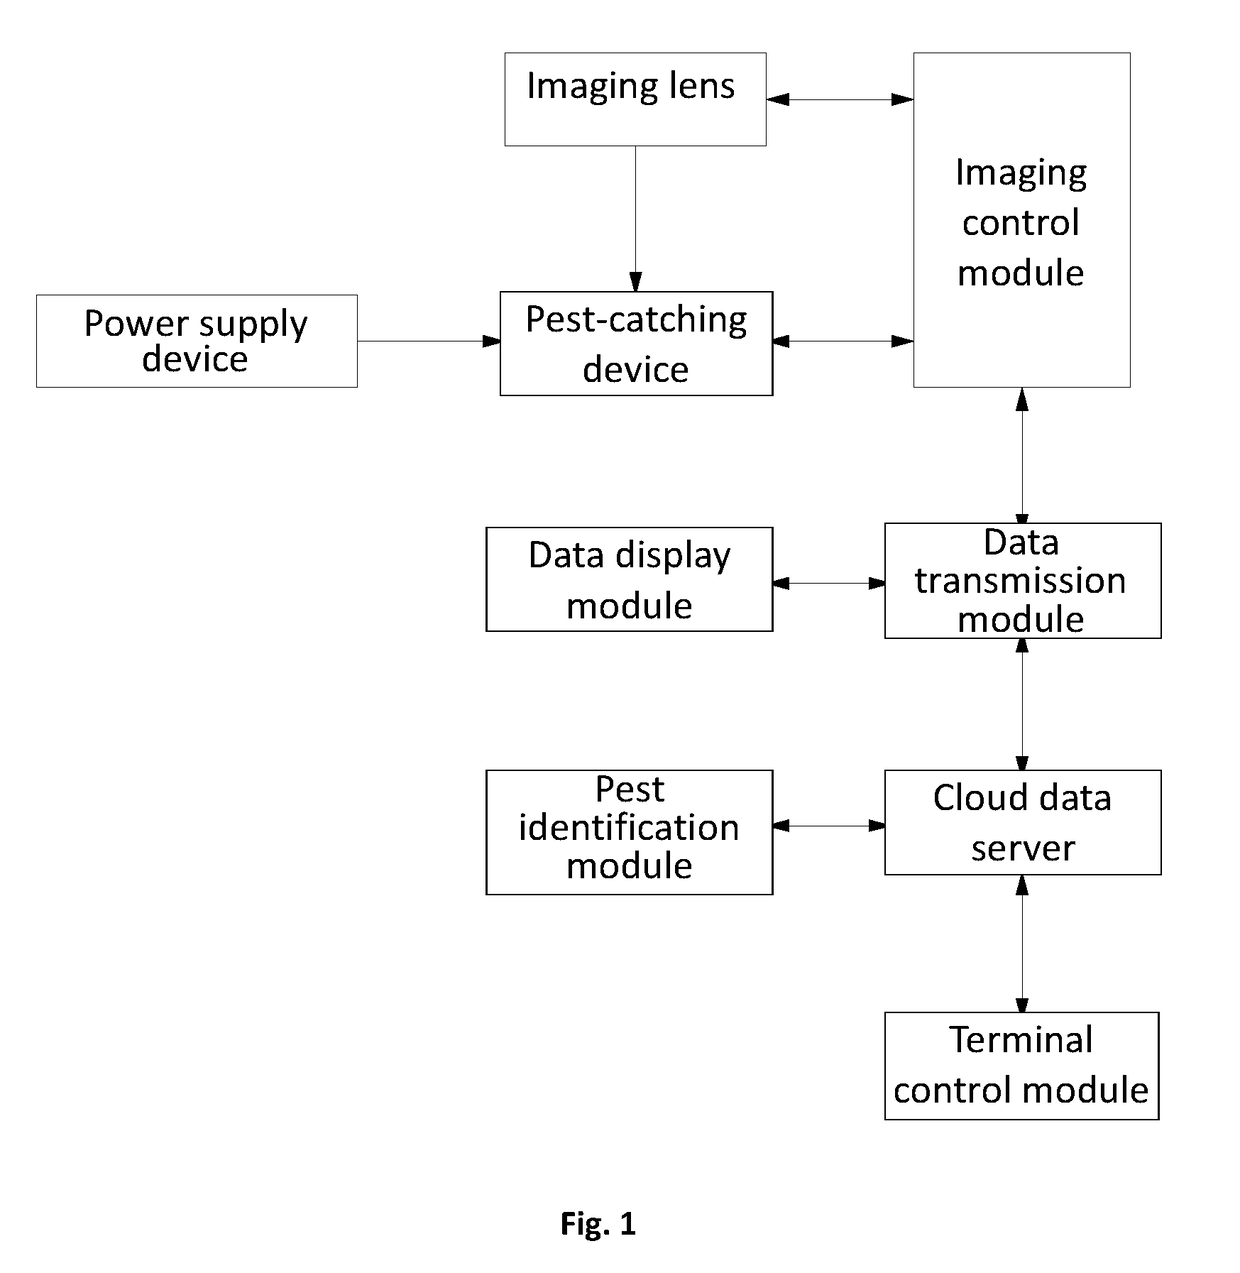 Computer intelligent imaging-based system for automatic pest identification and pest-catching monitoring